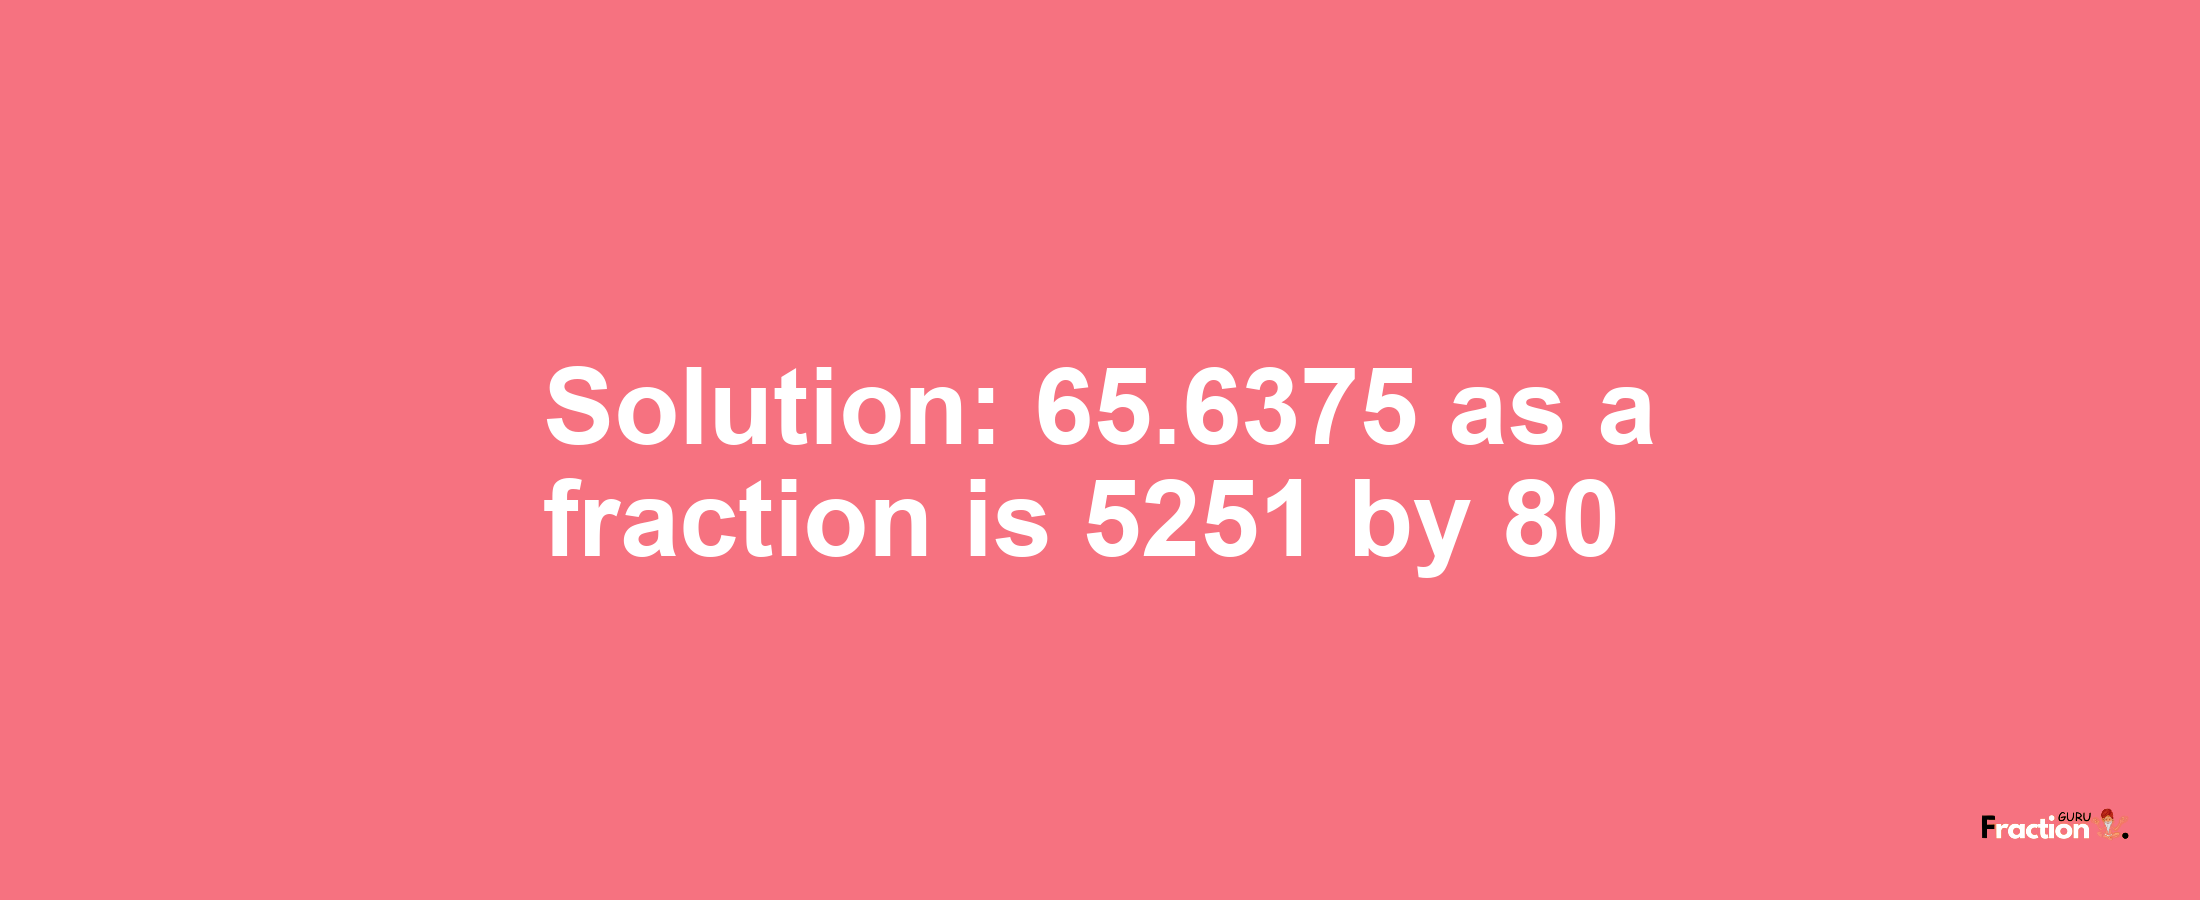 Solution:65.6375 as a fraction is 5251/80